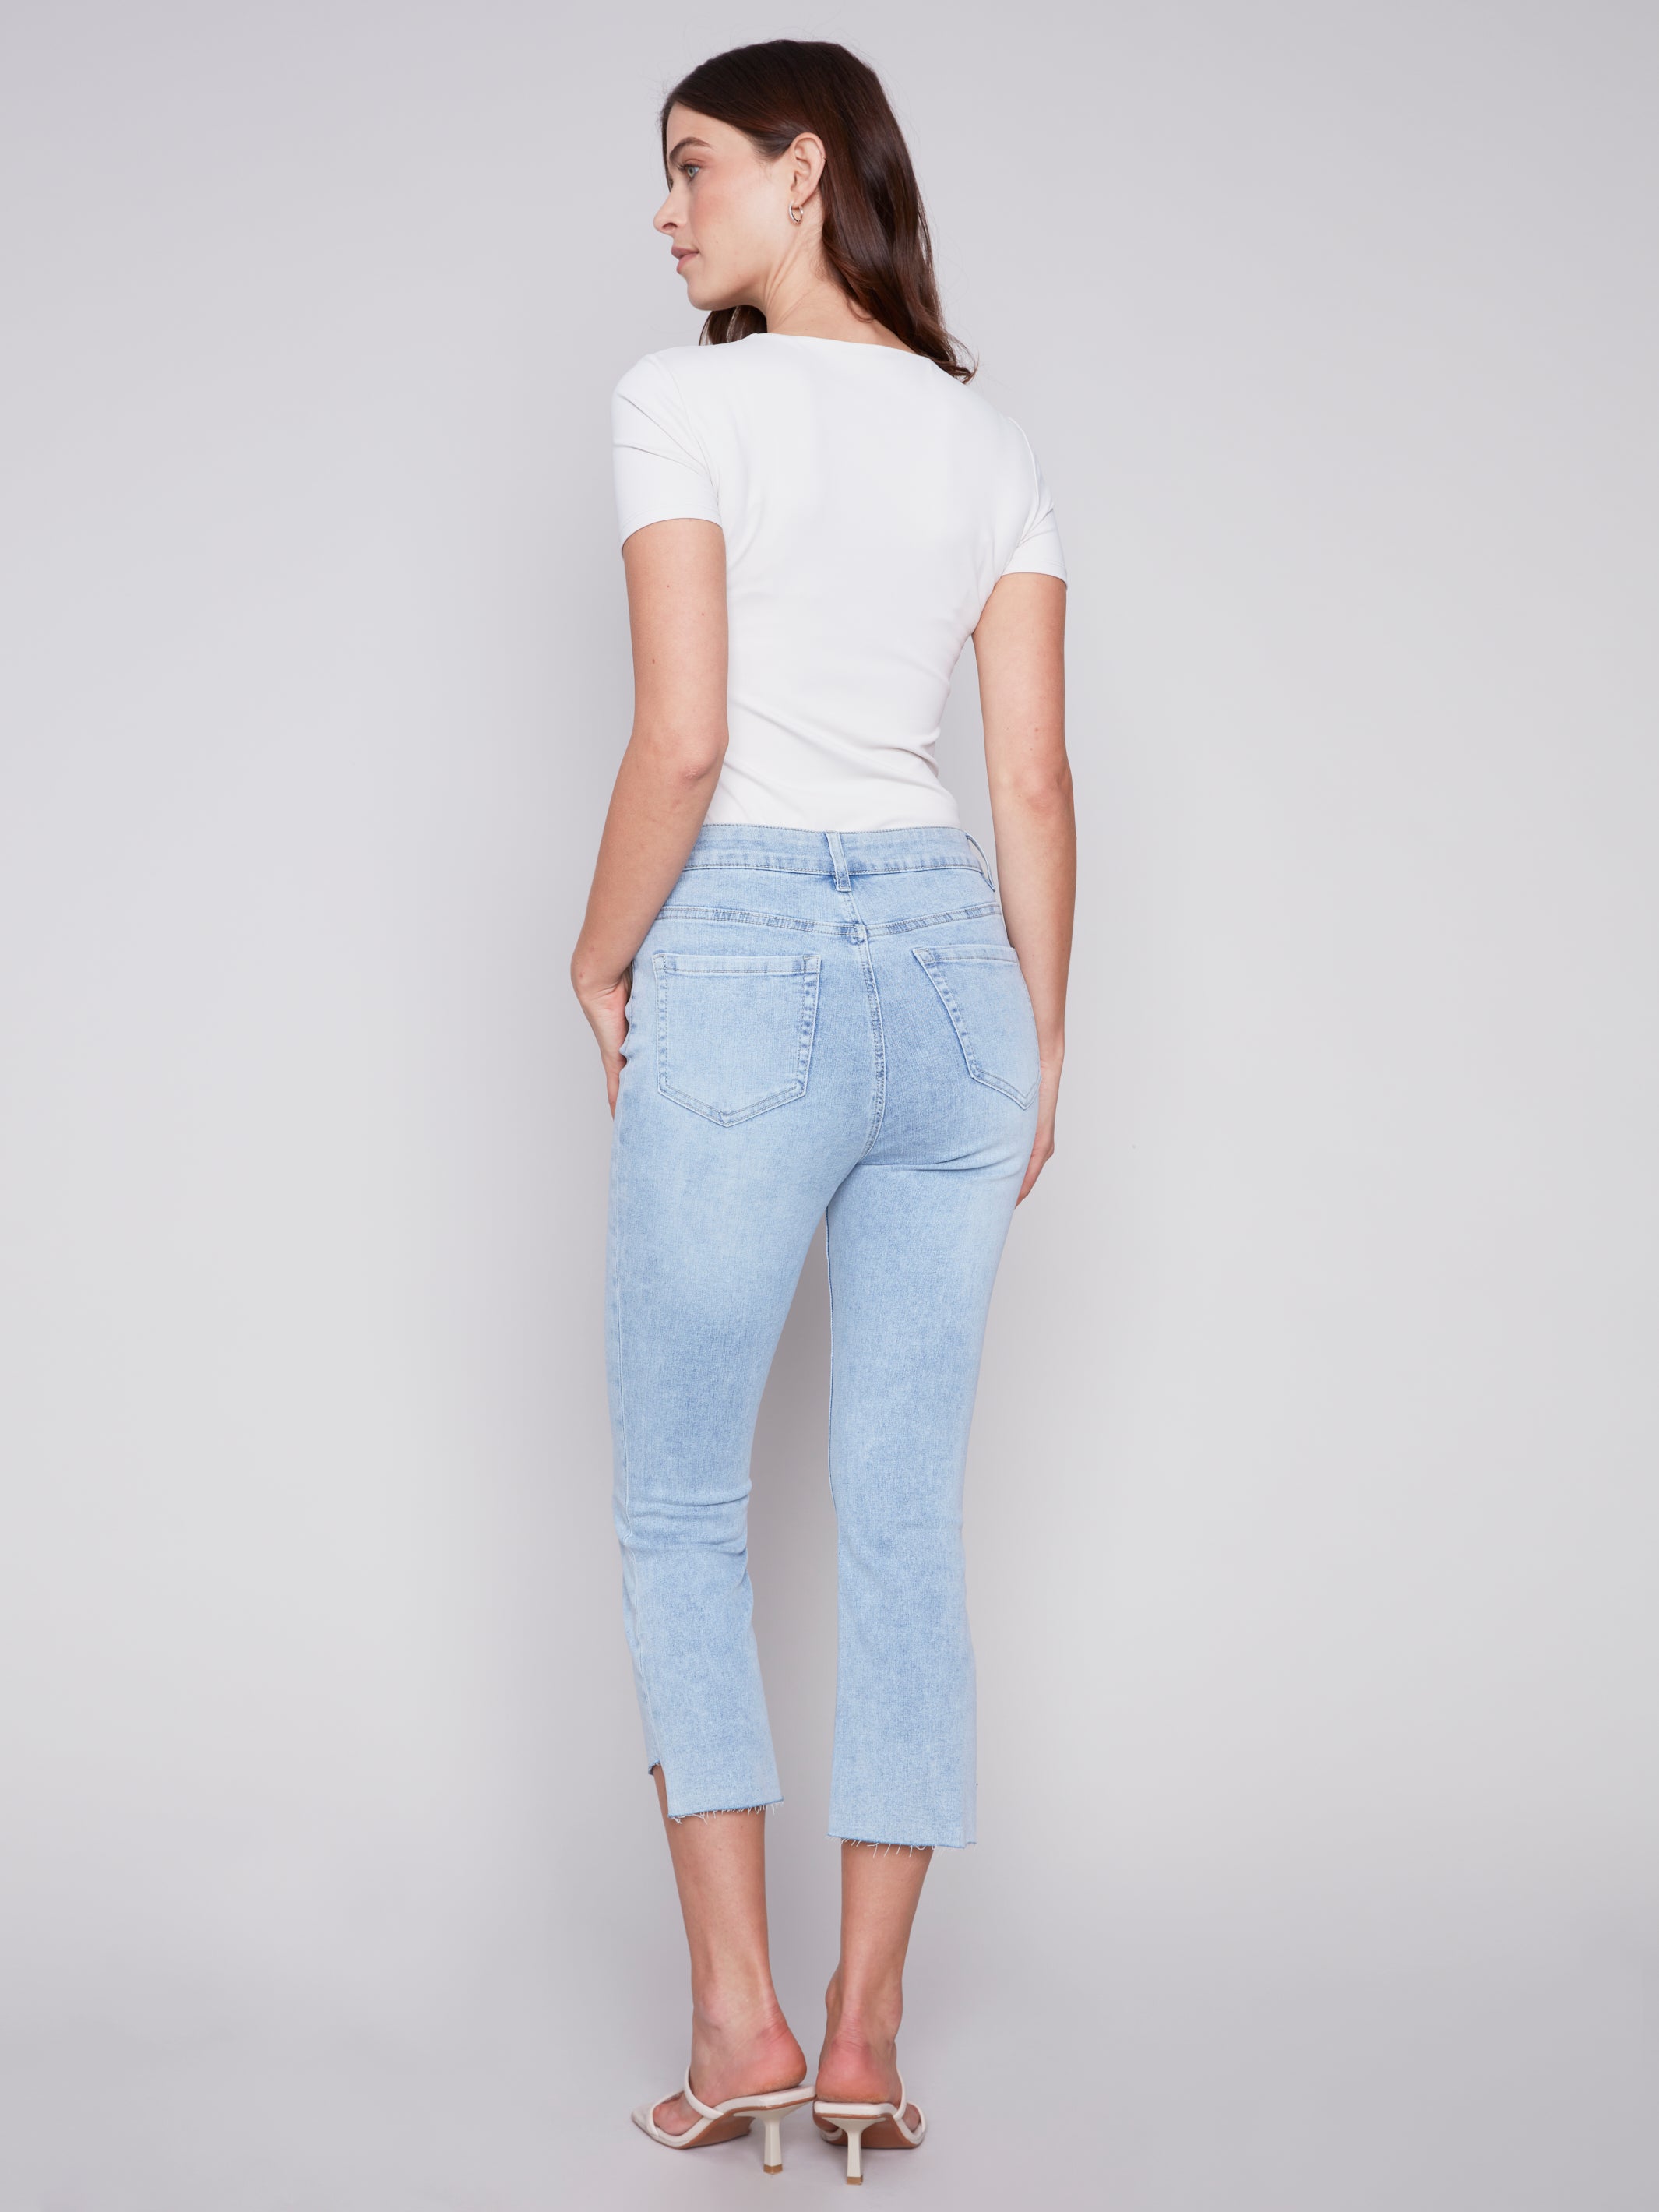 Cropped Kick Flare Jeans with Asymmetrical Hem by Charlie B